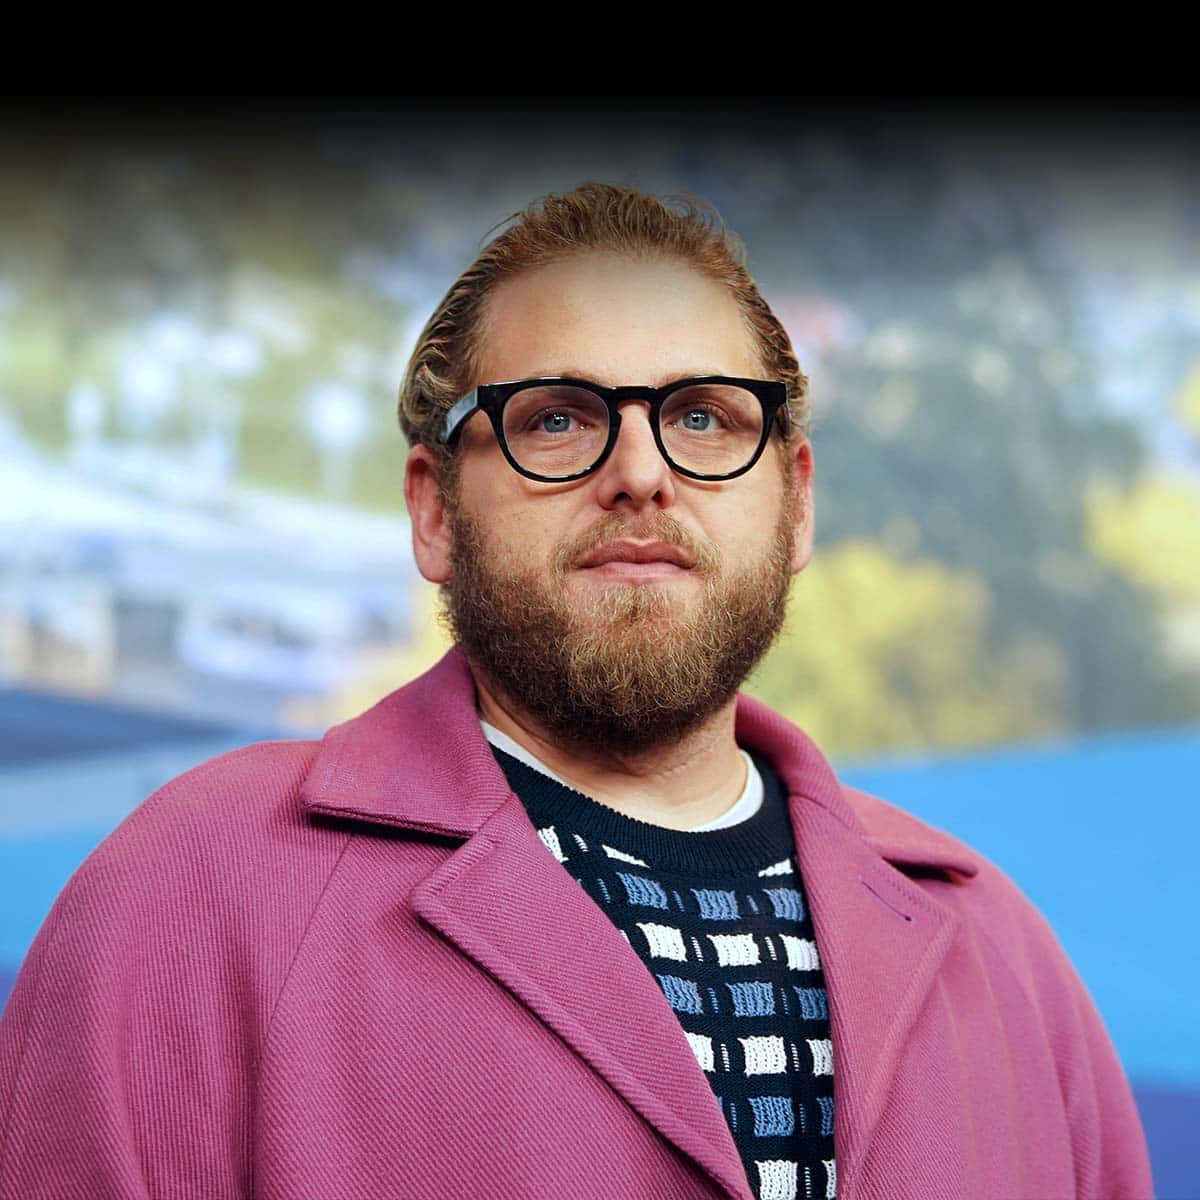 Jonah Hill Biography, Net-worth and Popular Movies